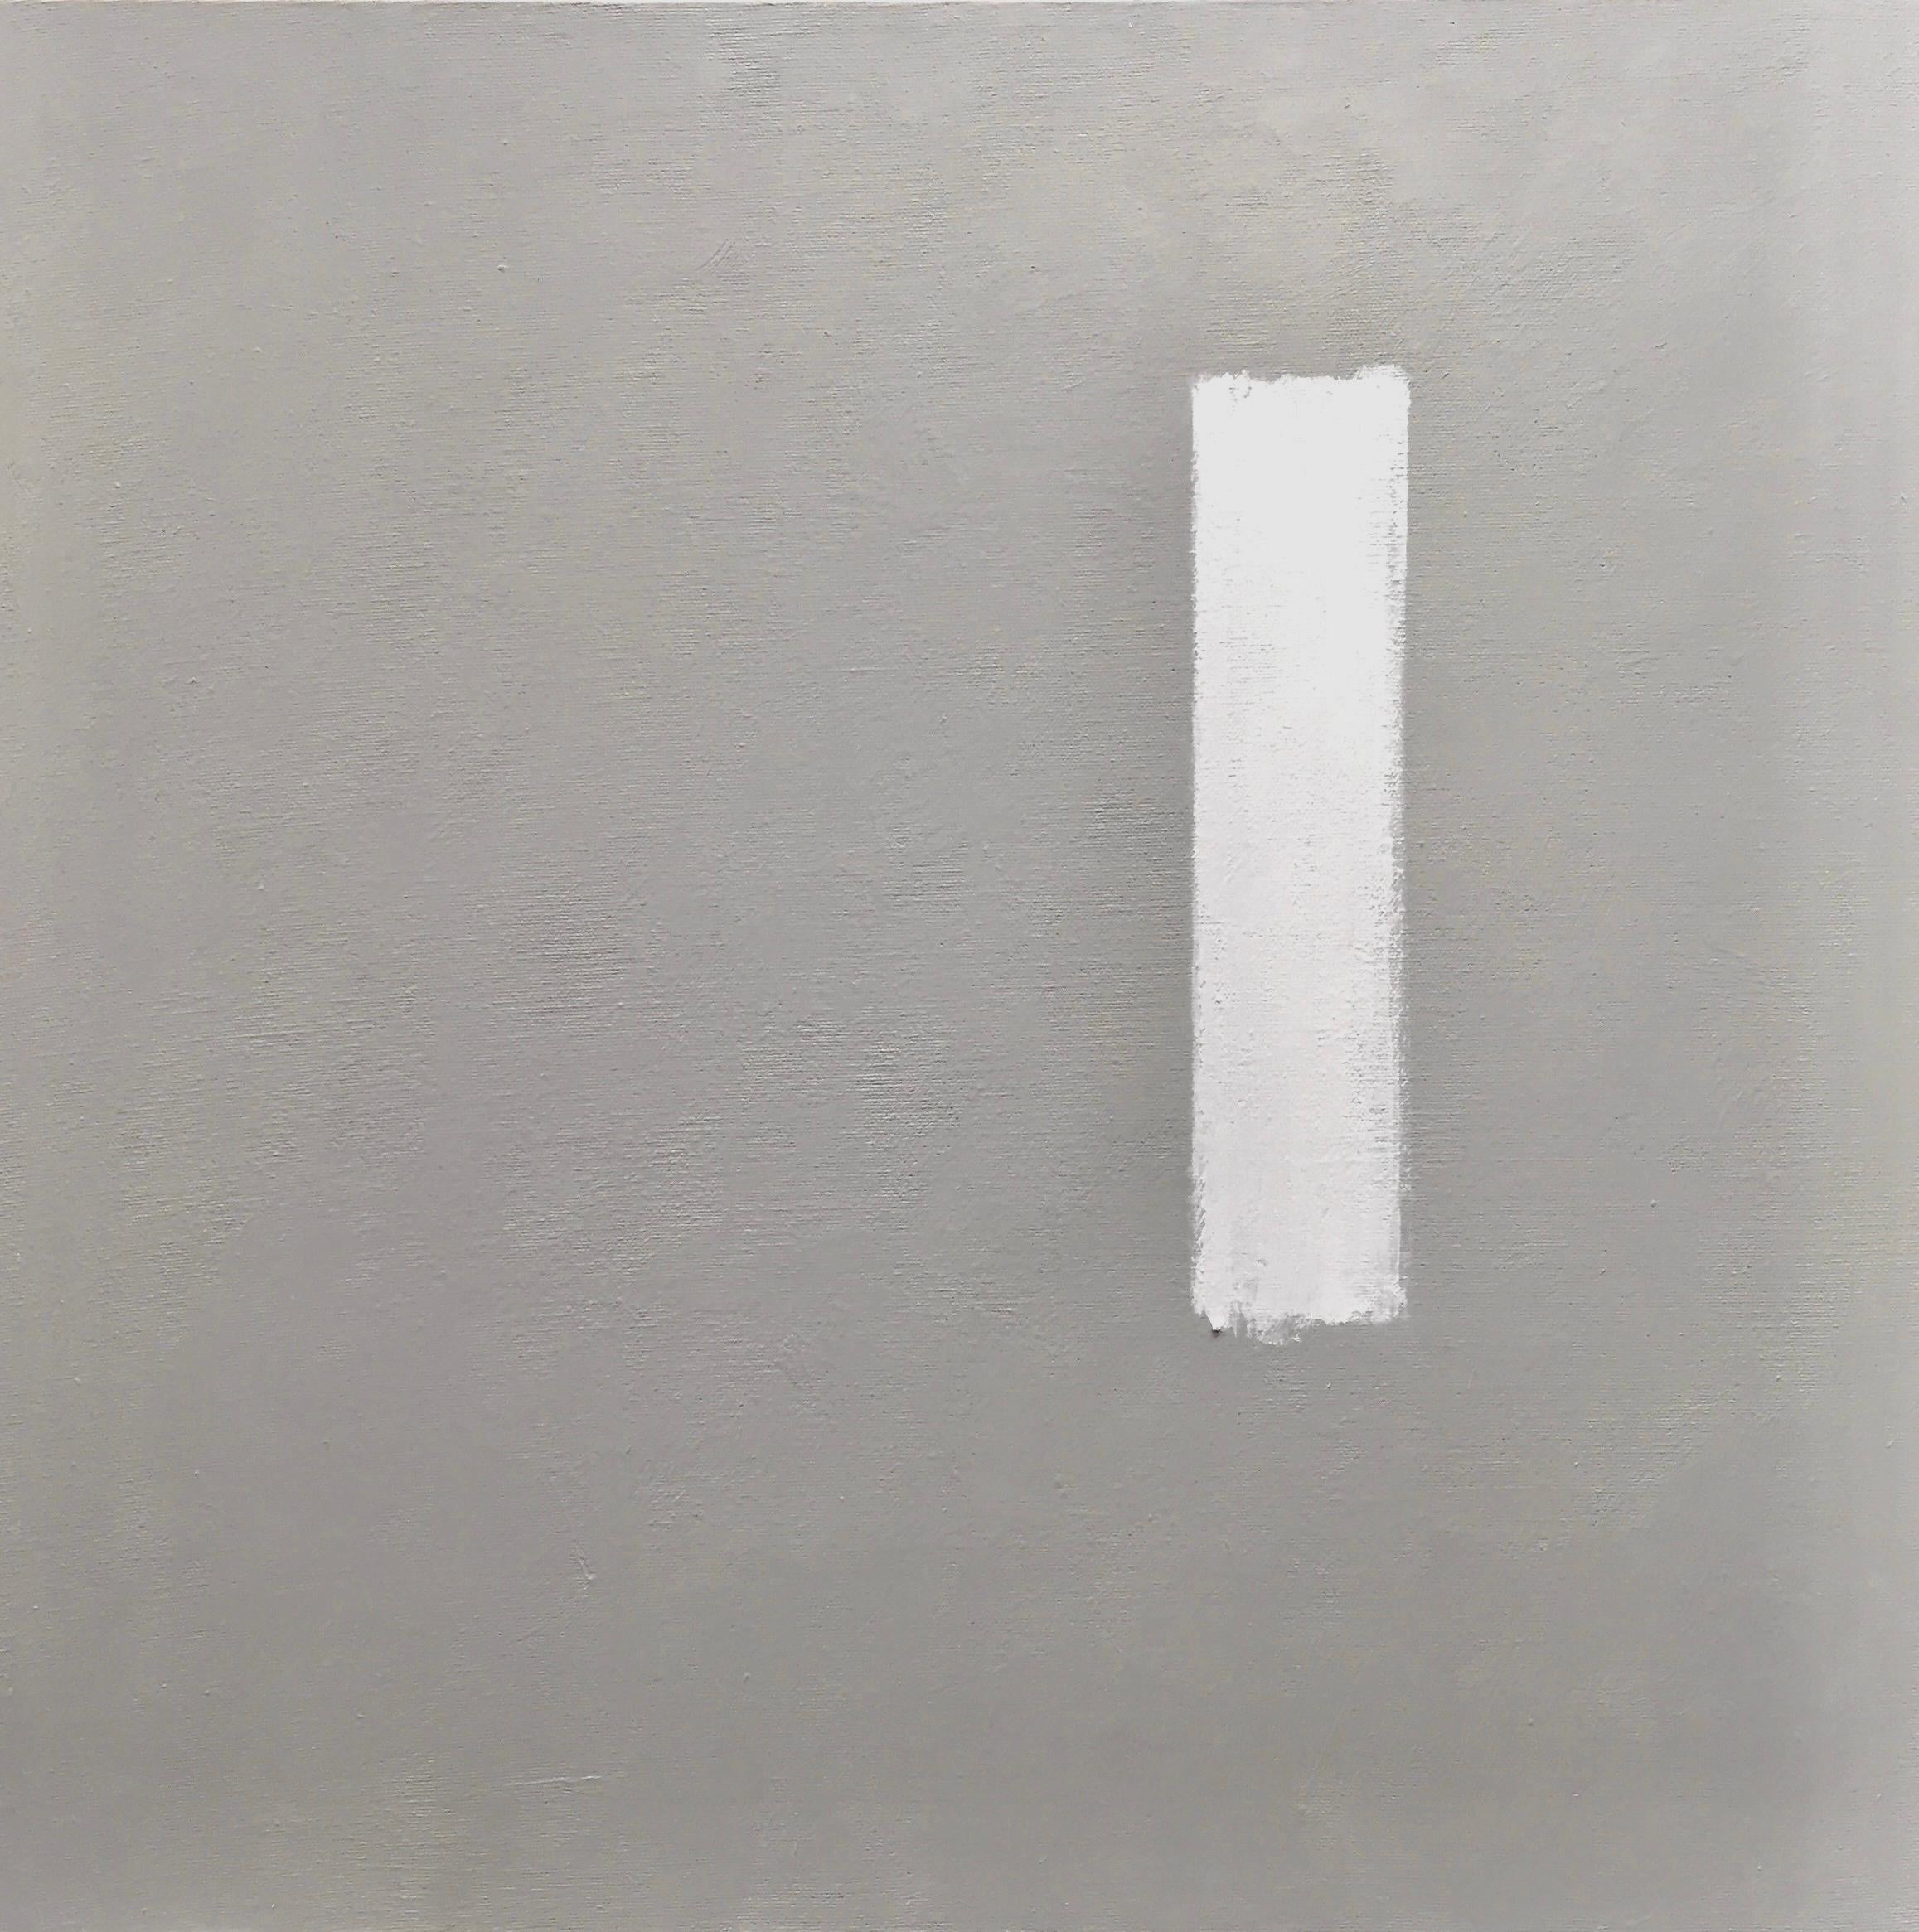 This modern, minimal, grey and white painting on canvas places emphasis on simplifying the composition. Layers of paint build up a quiet texture. Understated yet engaging, it invites the viewer to experience an immediate, purely visual response.